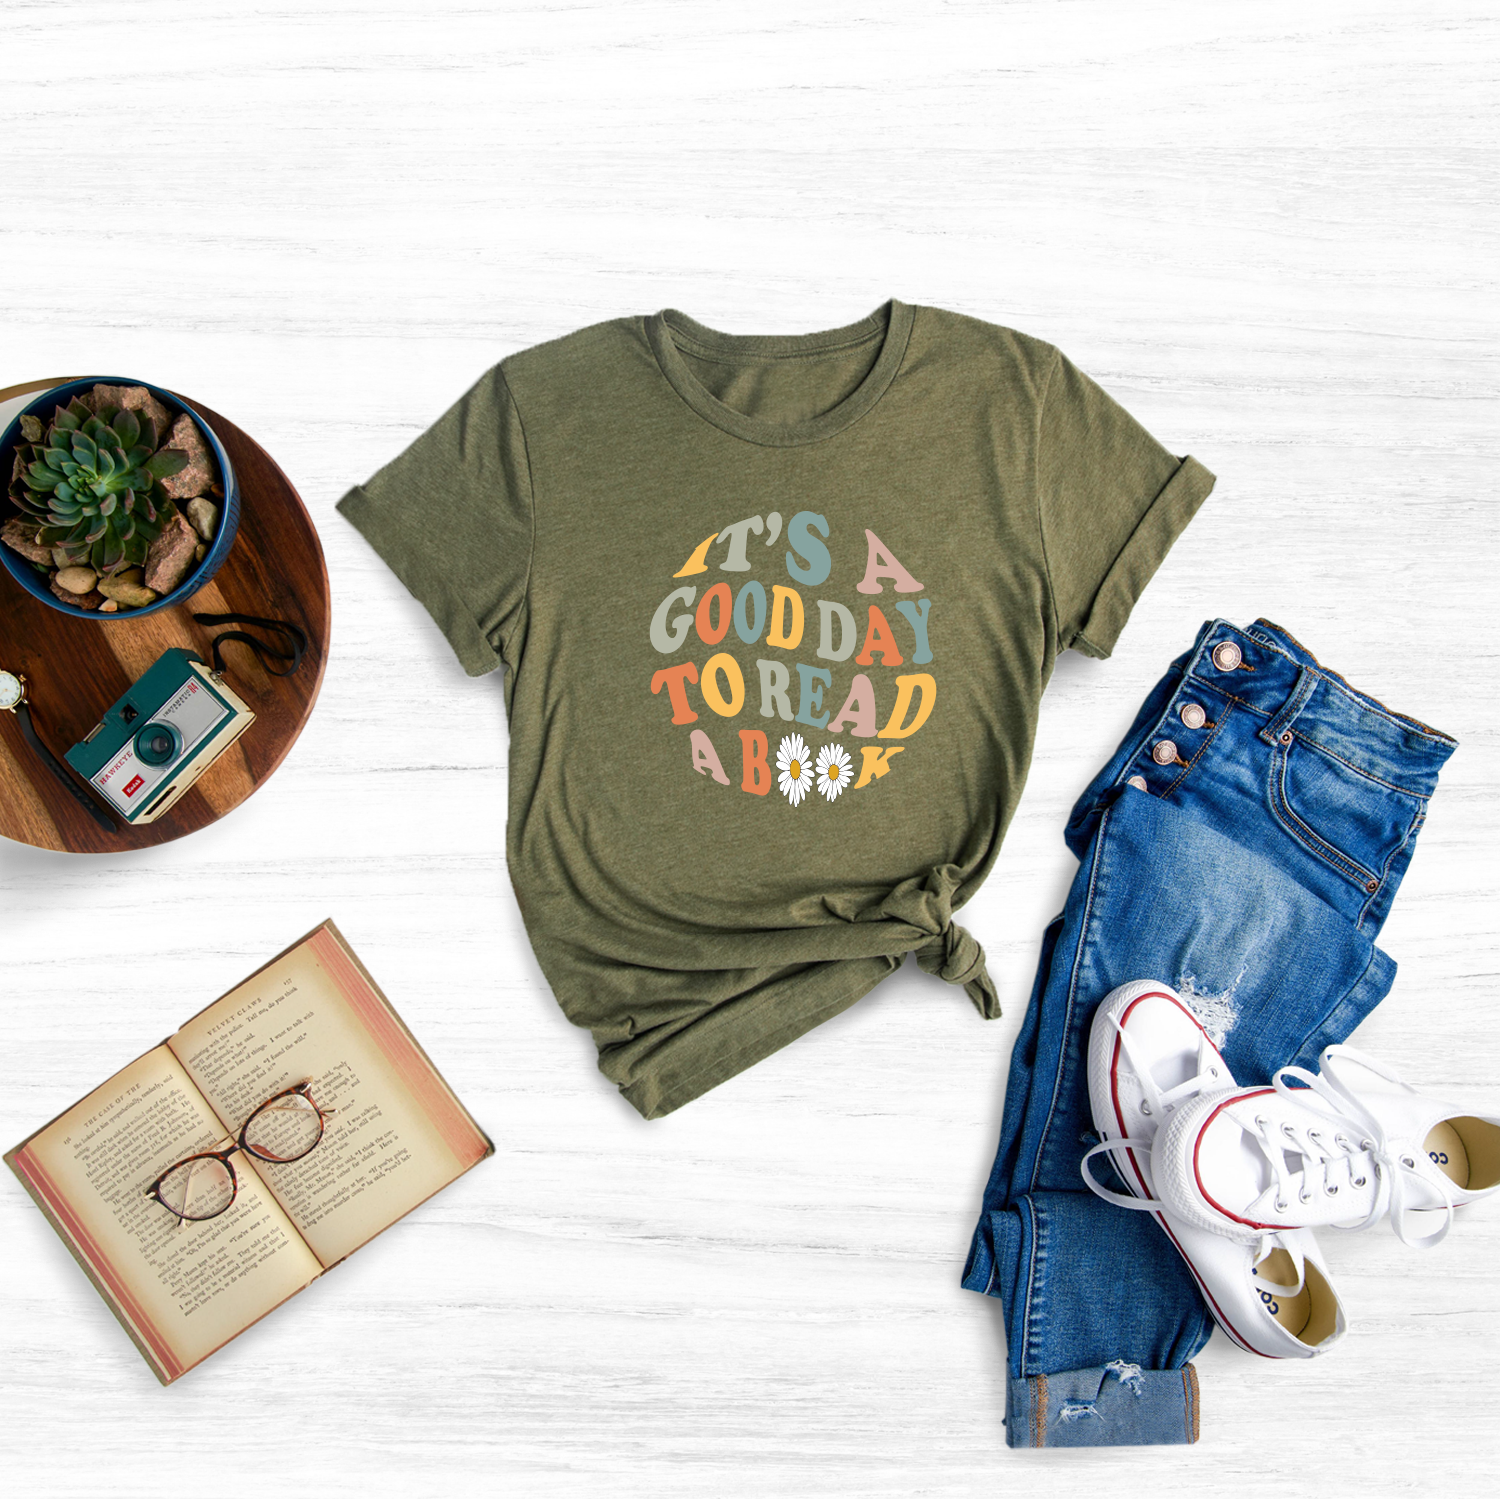 Embrace the Joy of Reading with the "It's A Good Day To Read" Shirt